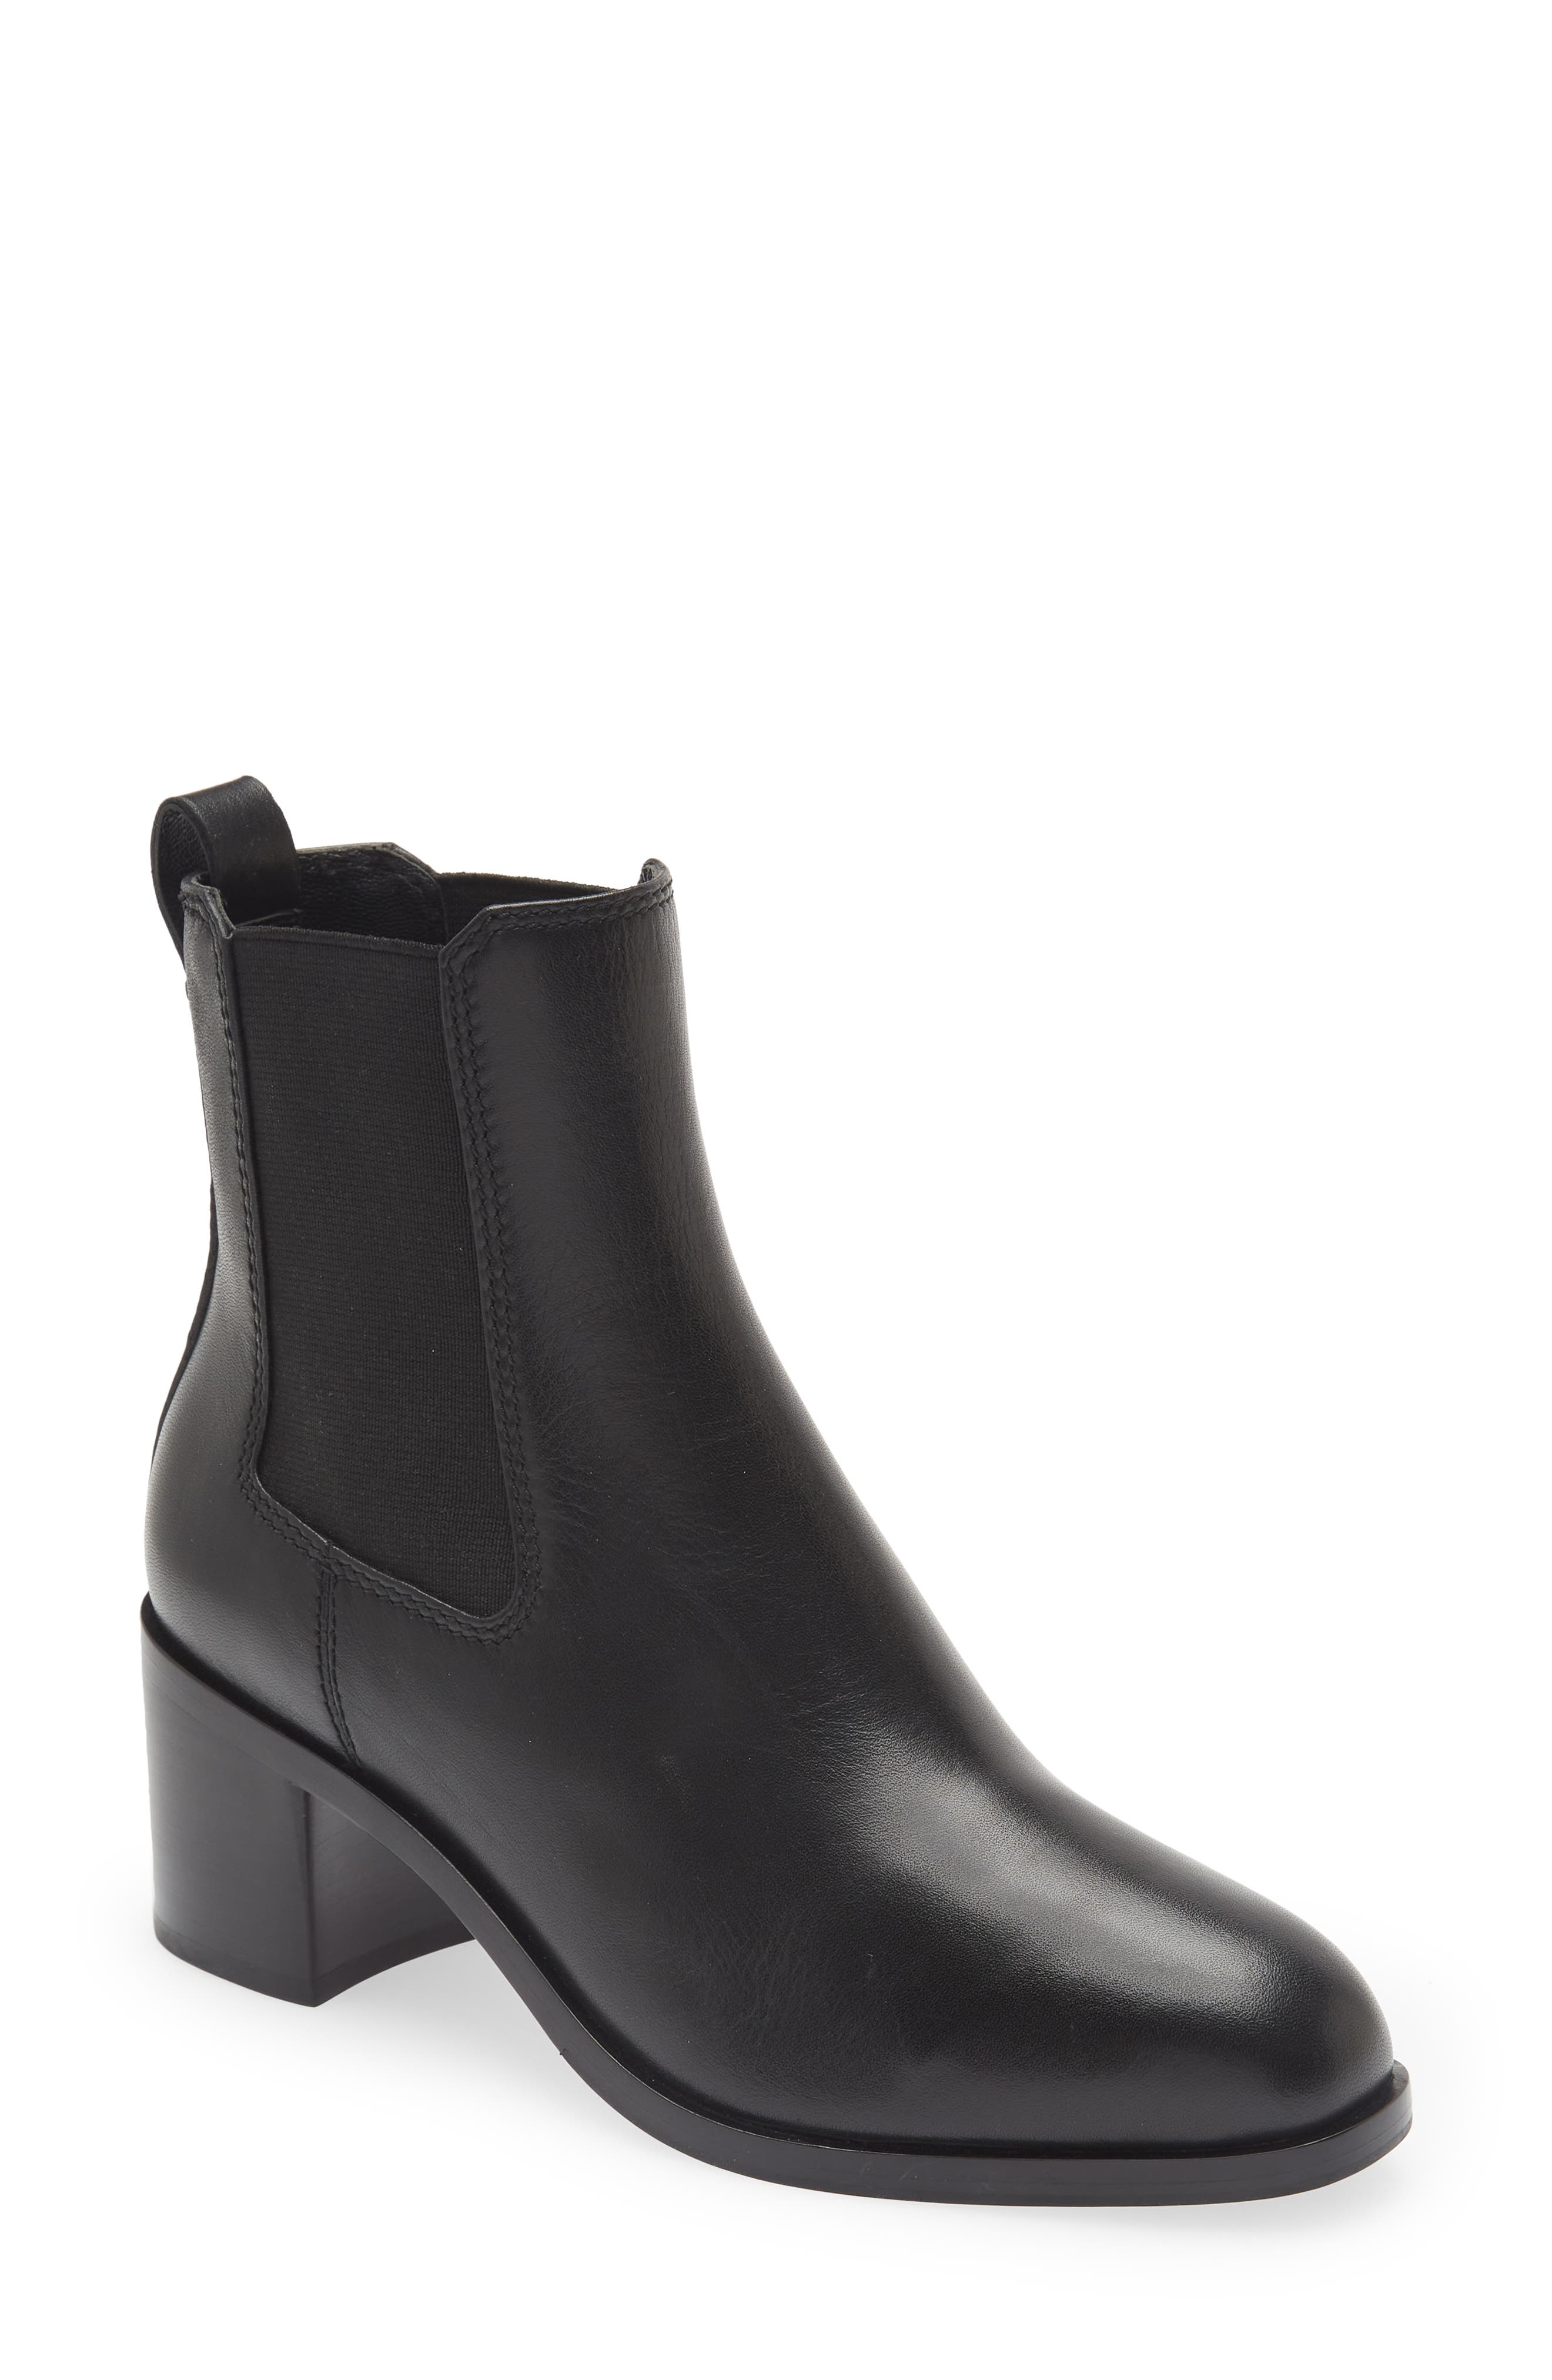 Gucci Frontal Tassels Detail Ankle Boot Black